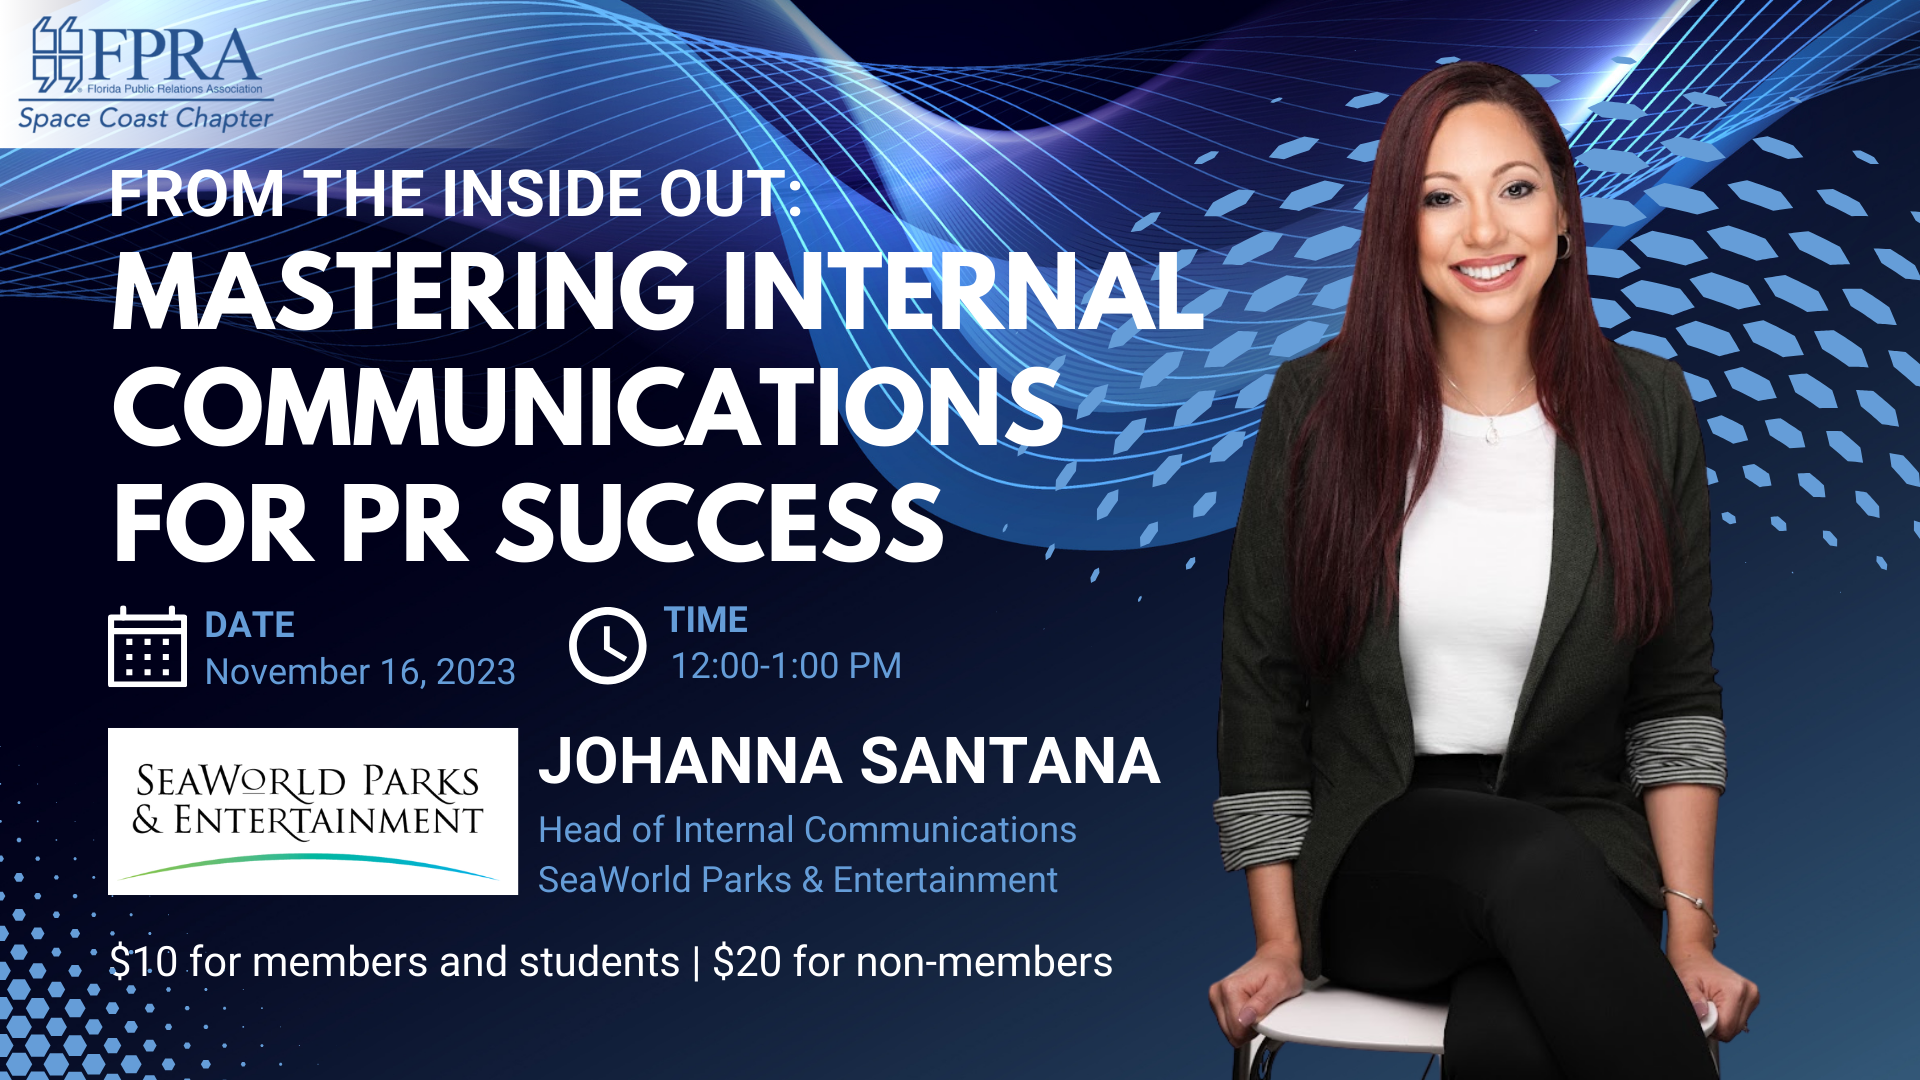 From the Inside Out: Mastering Internal Communications for PR Success